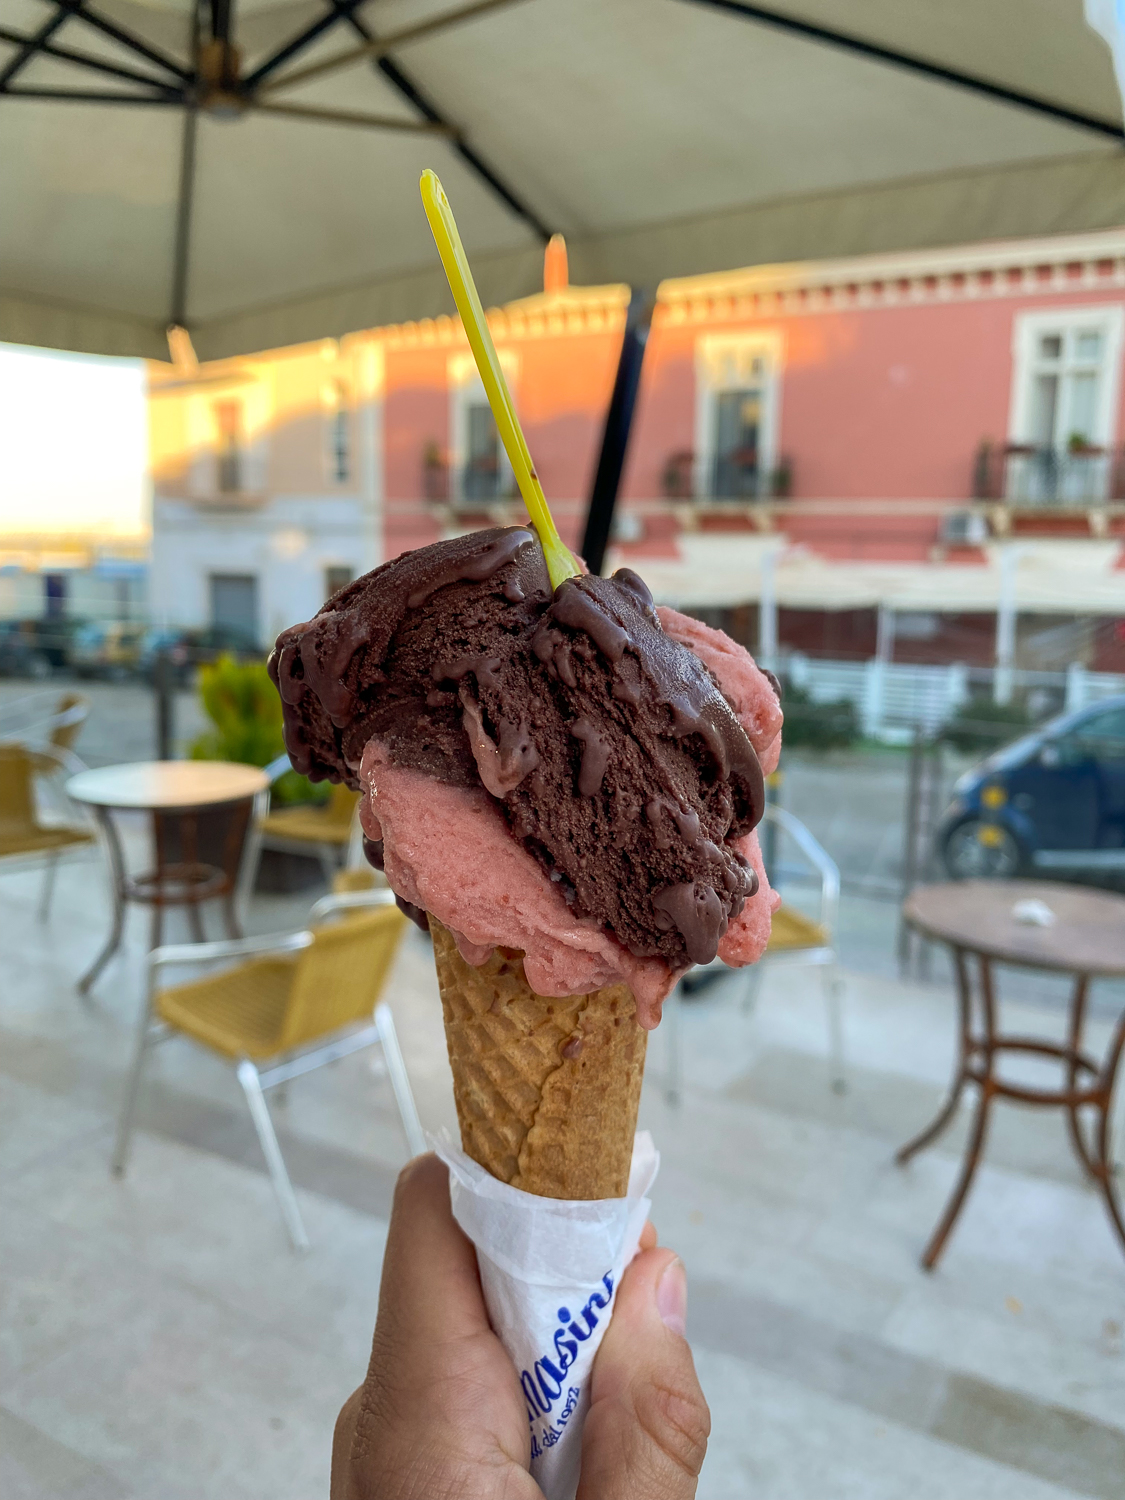 Holding a cone of ice cream from Gargano